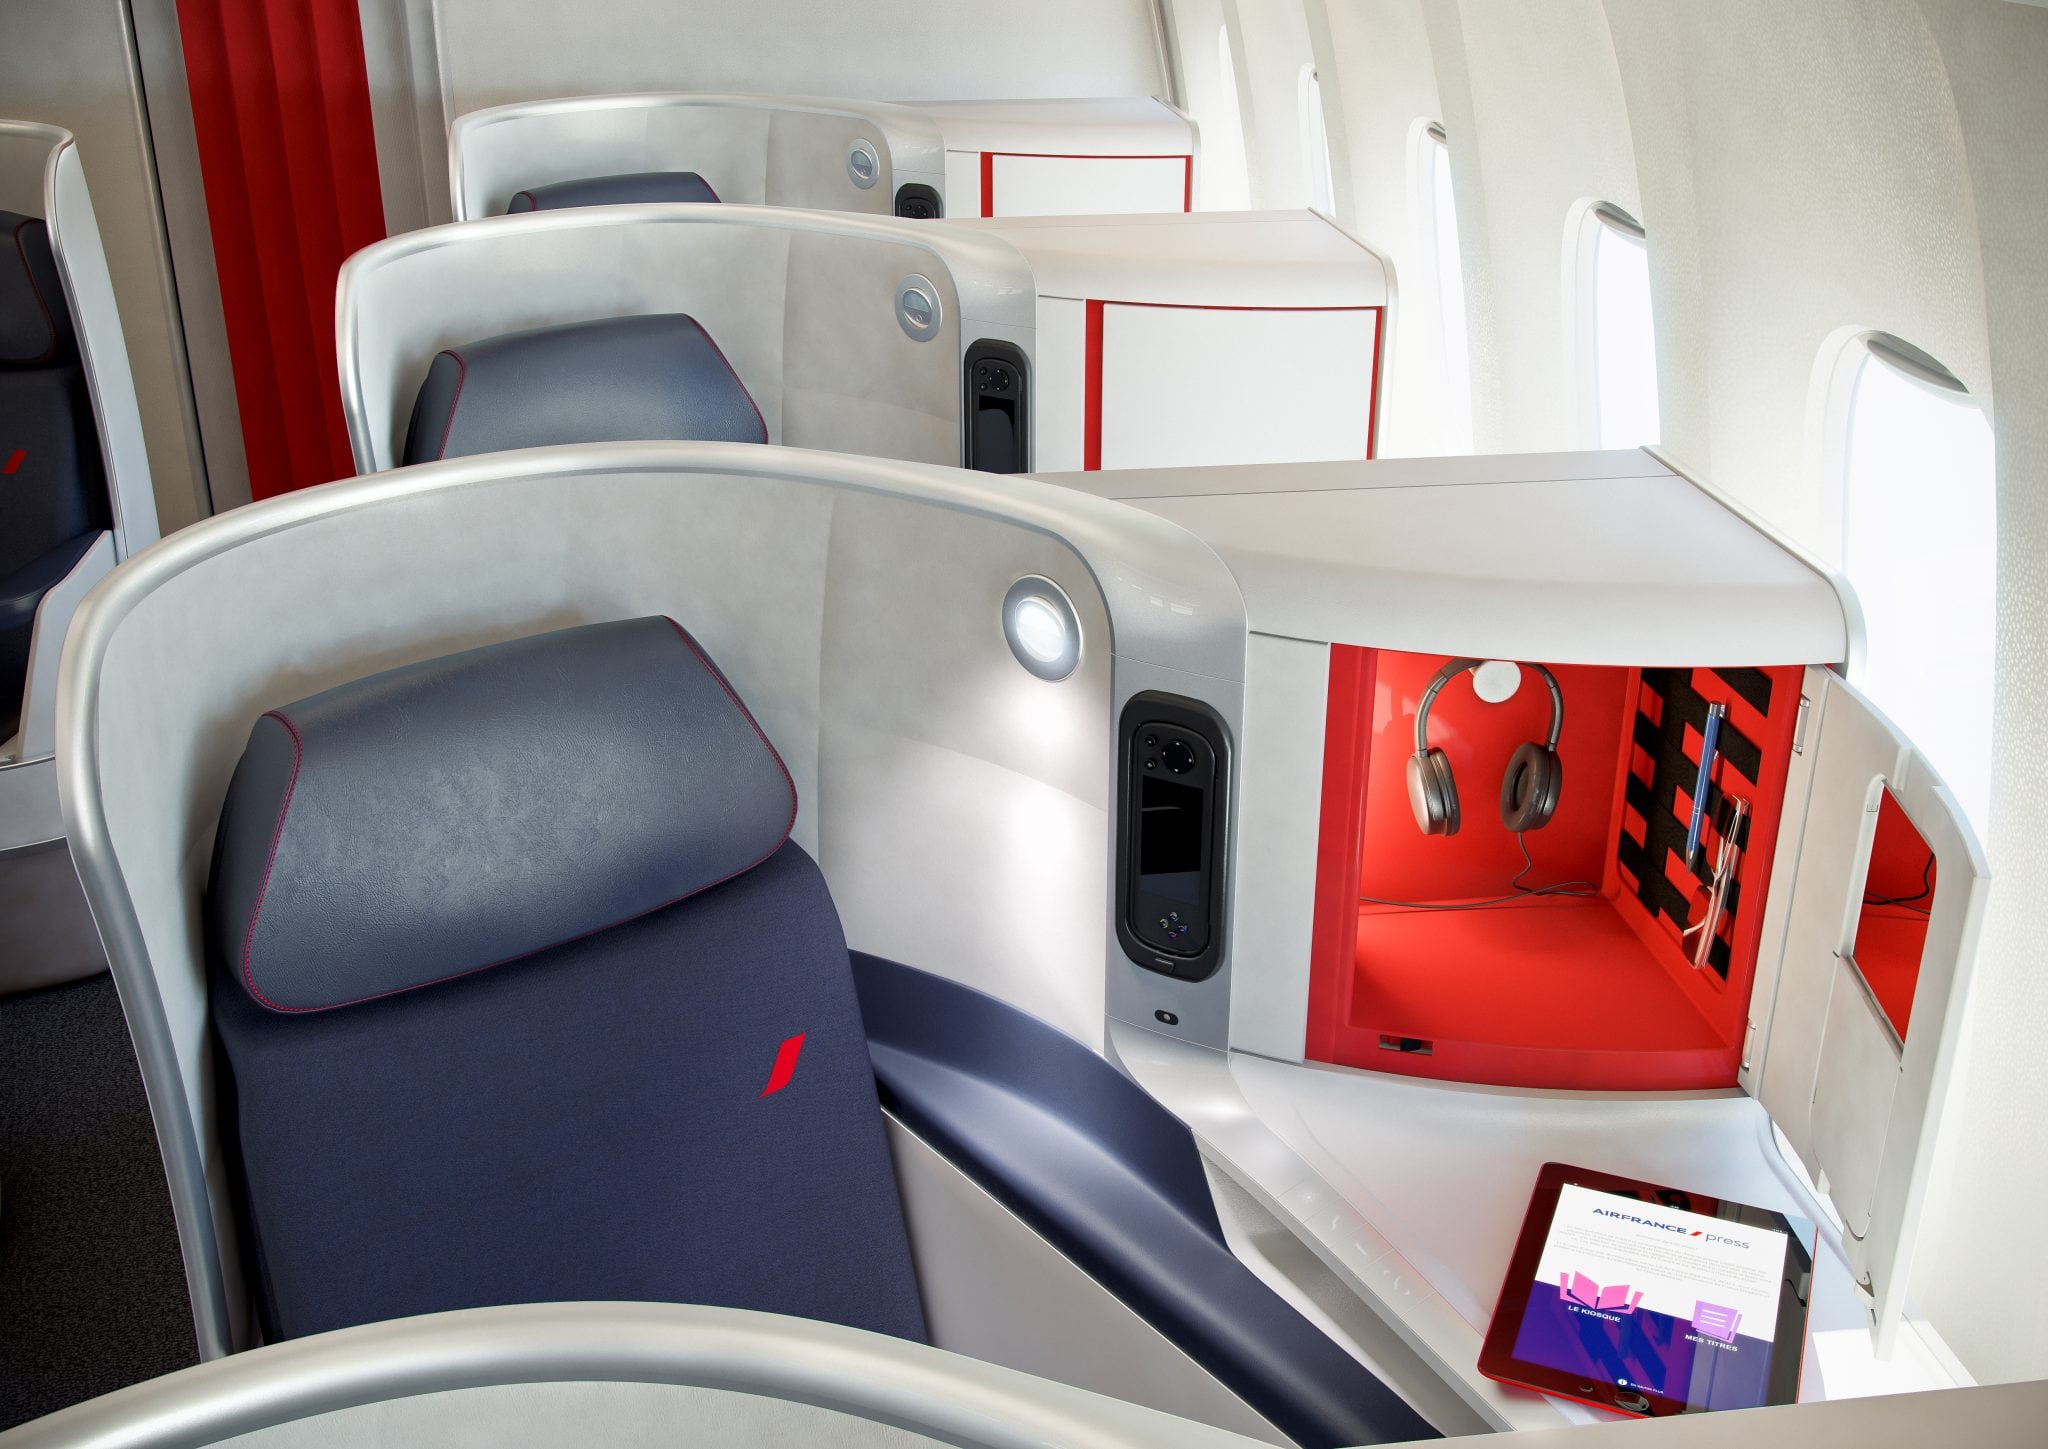 Who needs First? This new business class seat from Air France offers flyers full privacy and full-flat beds as well as 16-inch screens, Bose headsets, and ample personal space. 